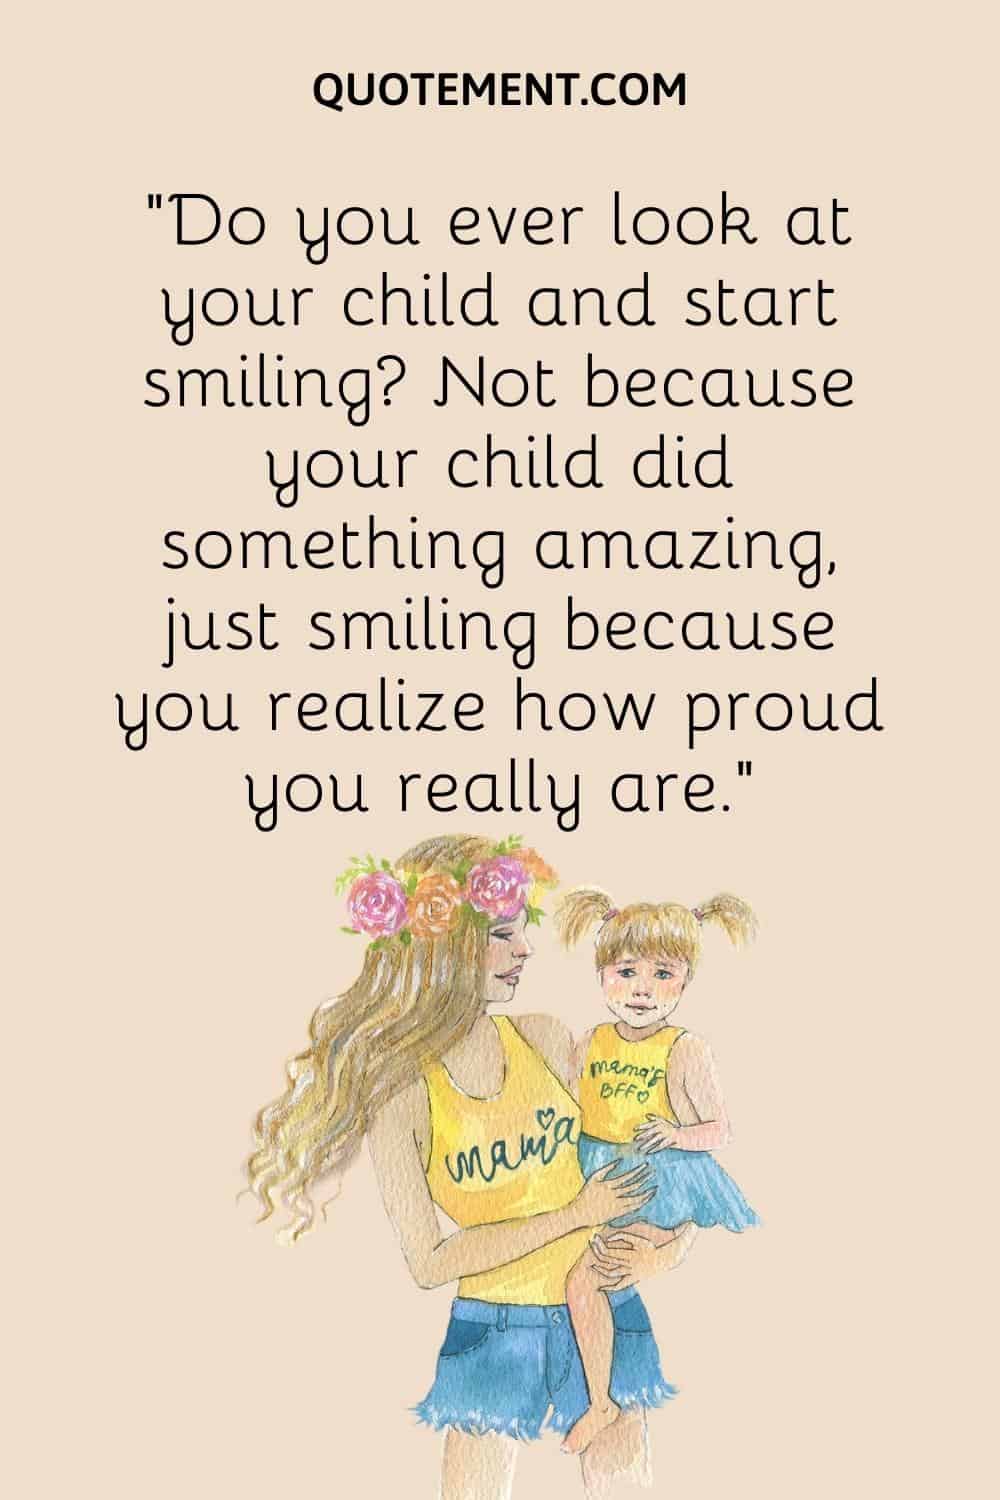 “Do you ever look at your child and start smiling Not because your child did something amazing, just smiling because you realize how proud you really are.”